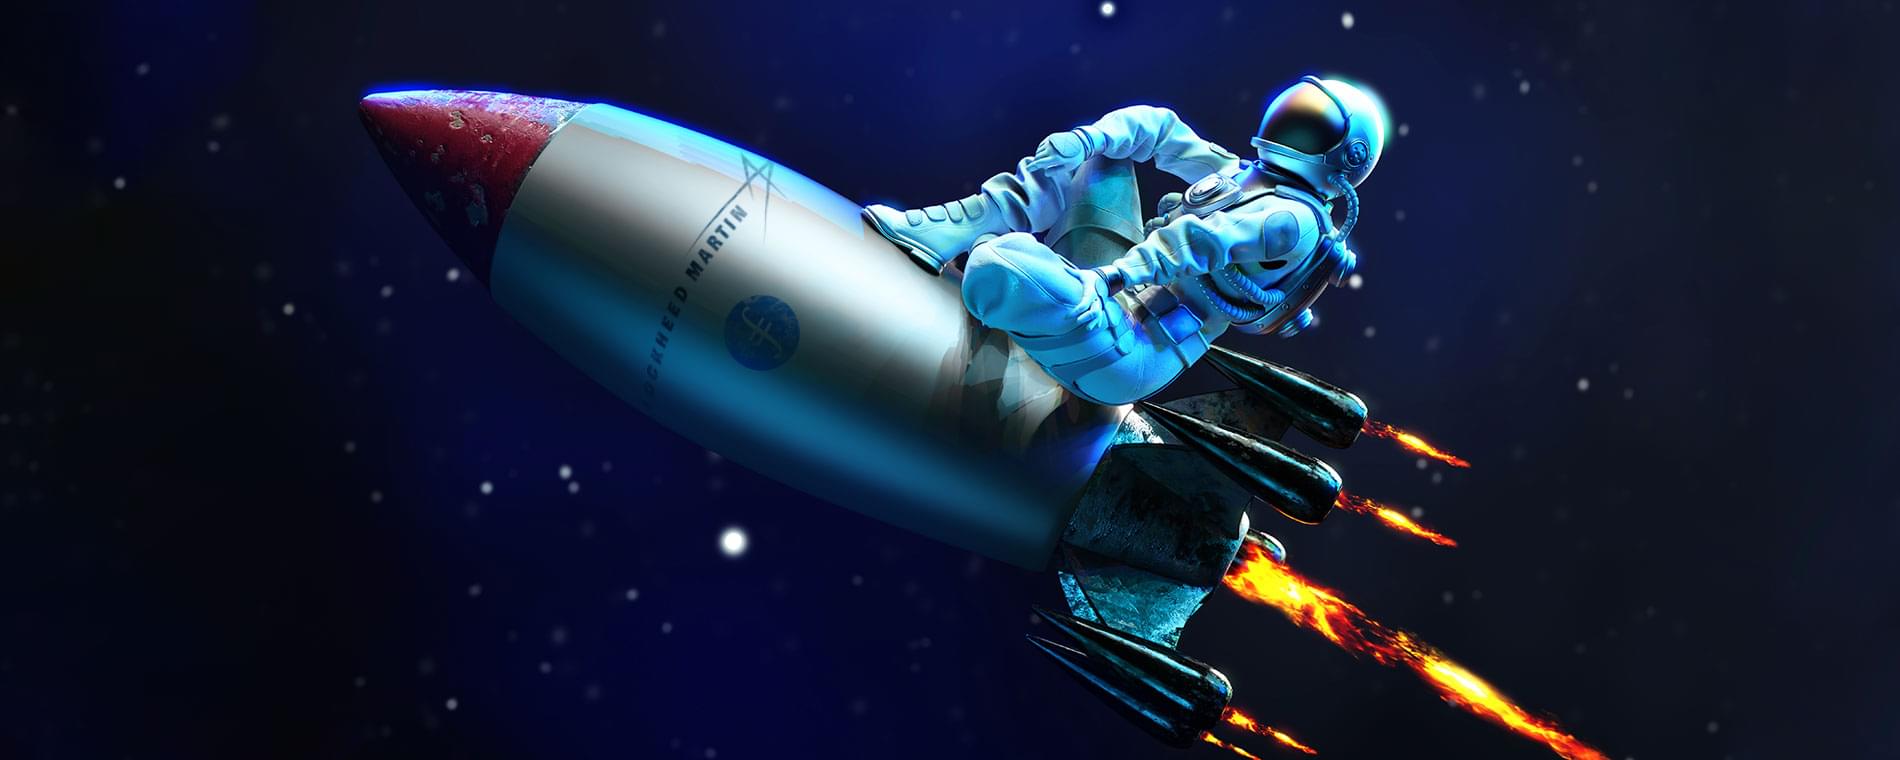 Filecoin and Lockheed Martin taking blockchain to outer space